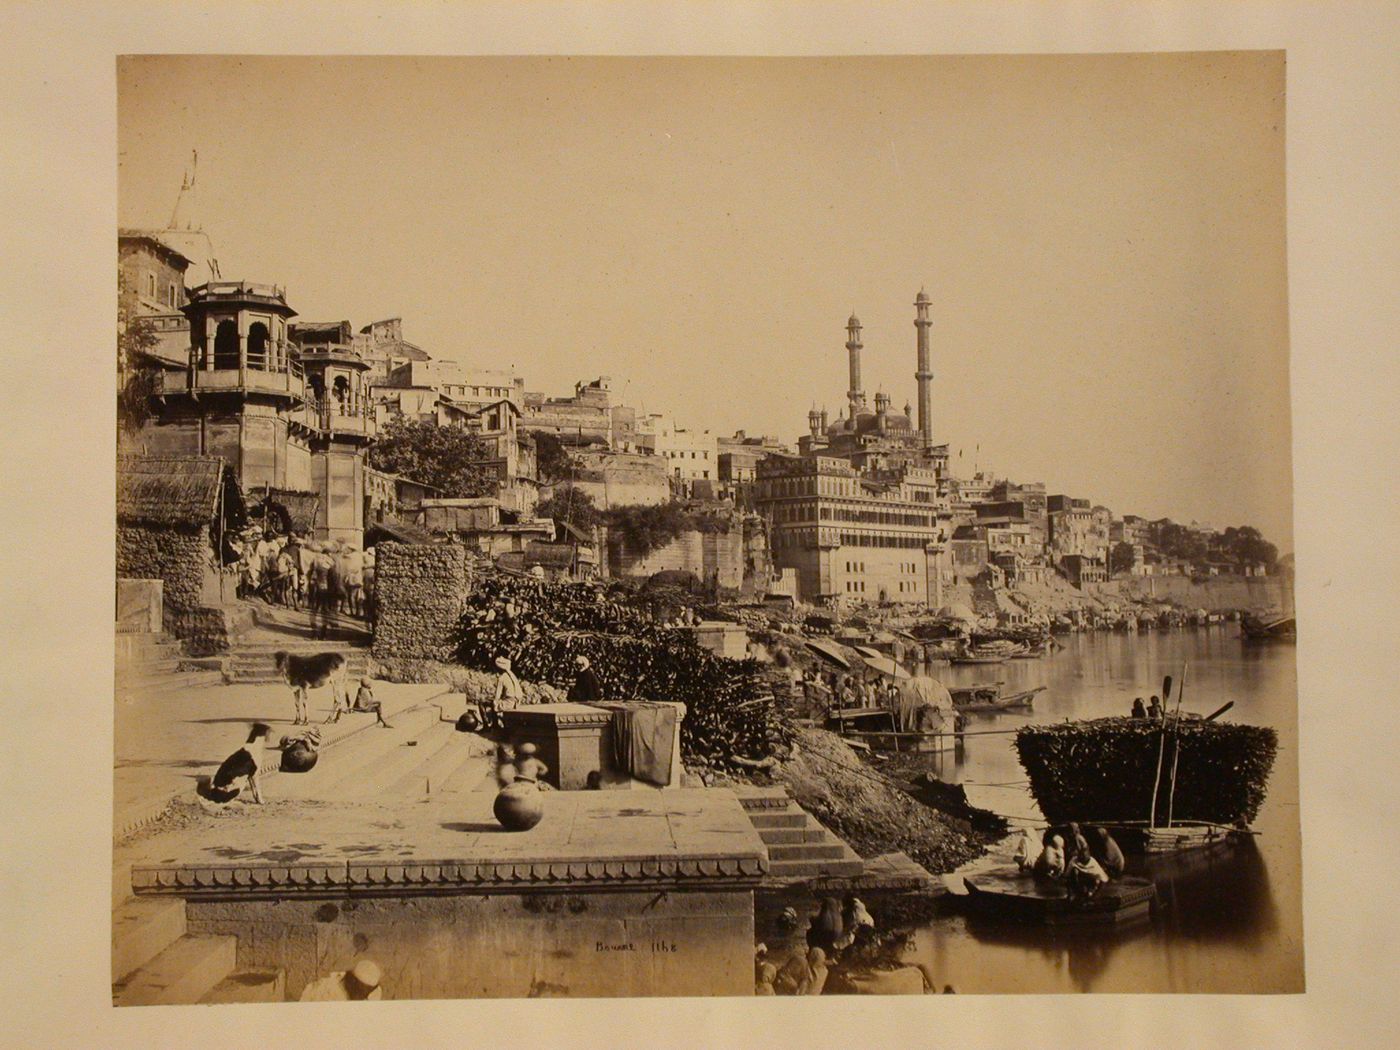 View of the Panchganga Ghat and buildings along the Ganges River showing the Great Mosque of Aurangzeb (also known as the Jnana Vapi [Well of Knowledge] Mosque), Benares (now Varanasi), India